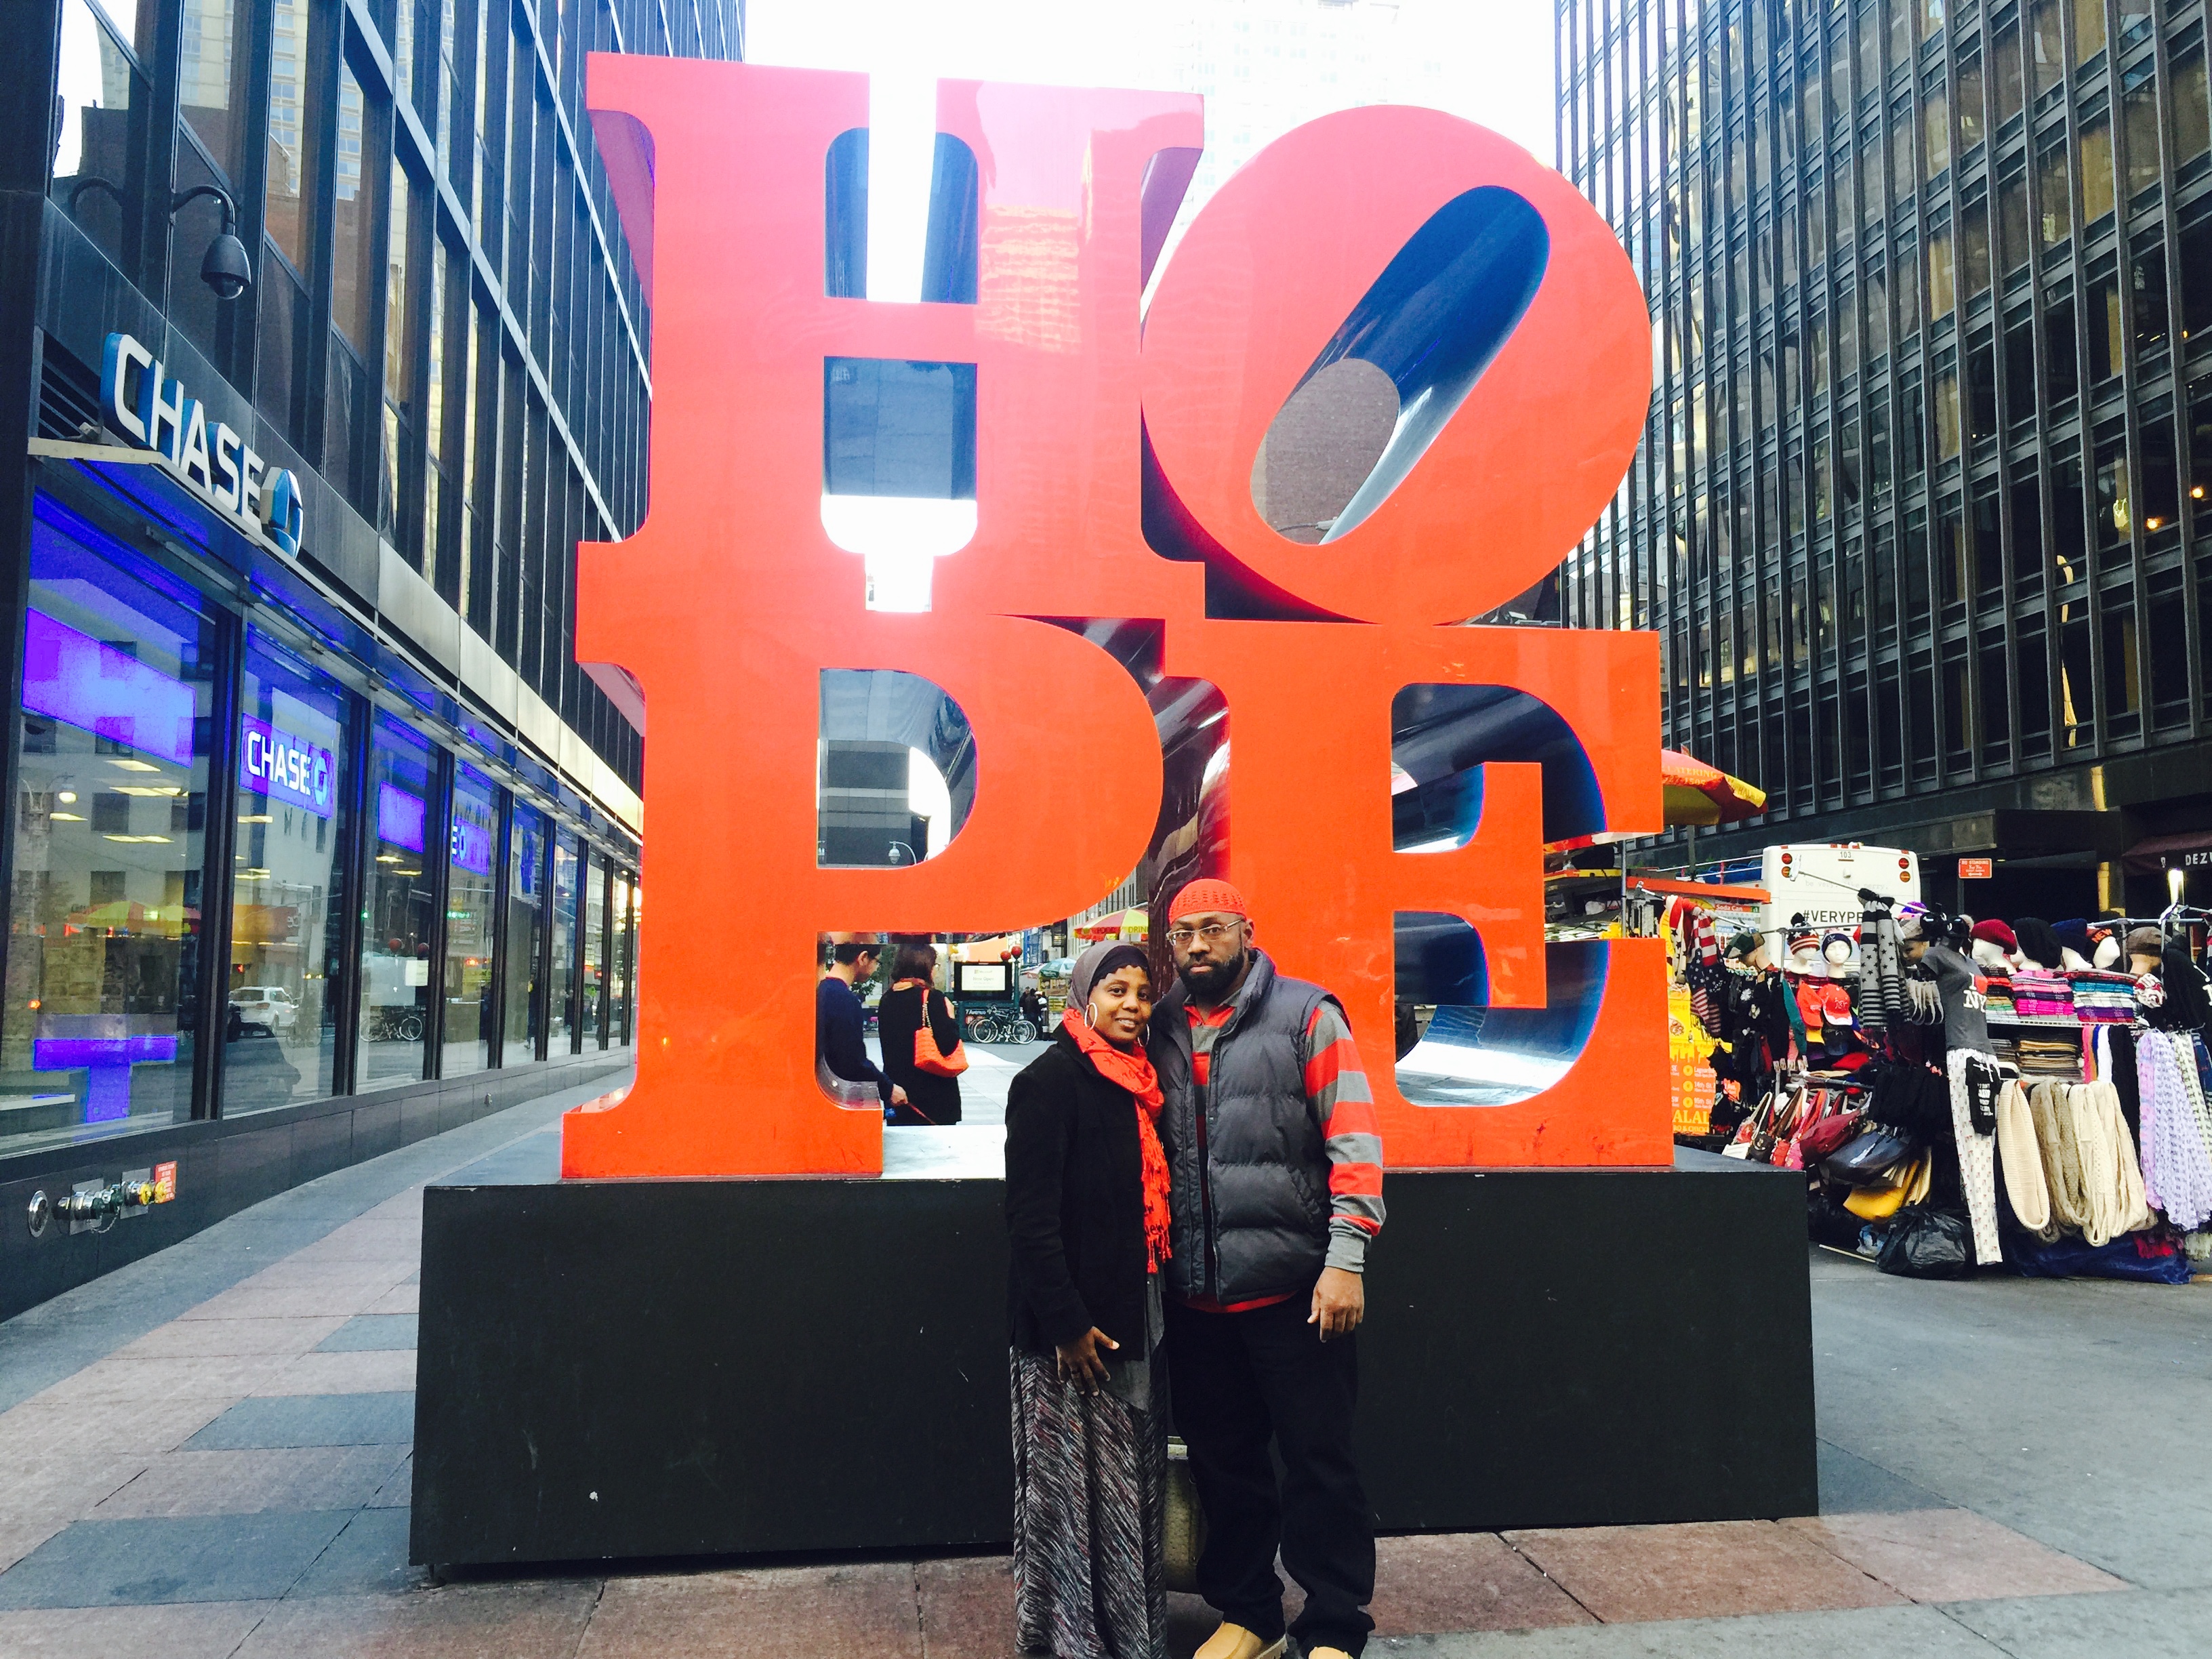 Surviving & Celebrating 26 Years of Marriage in NYC!